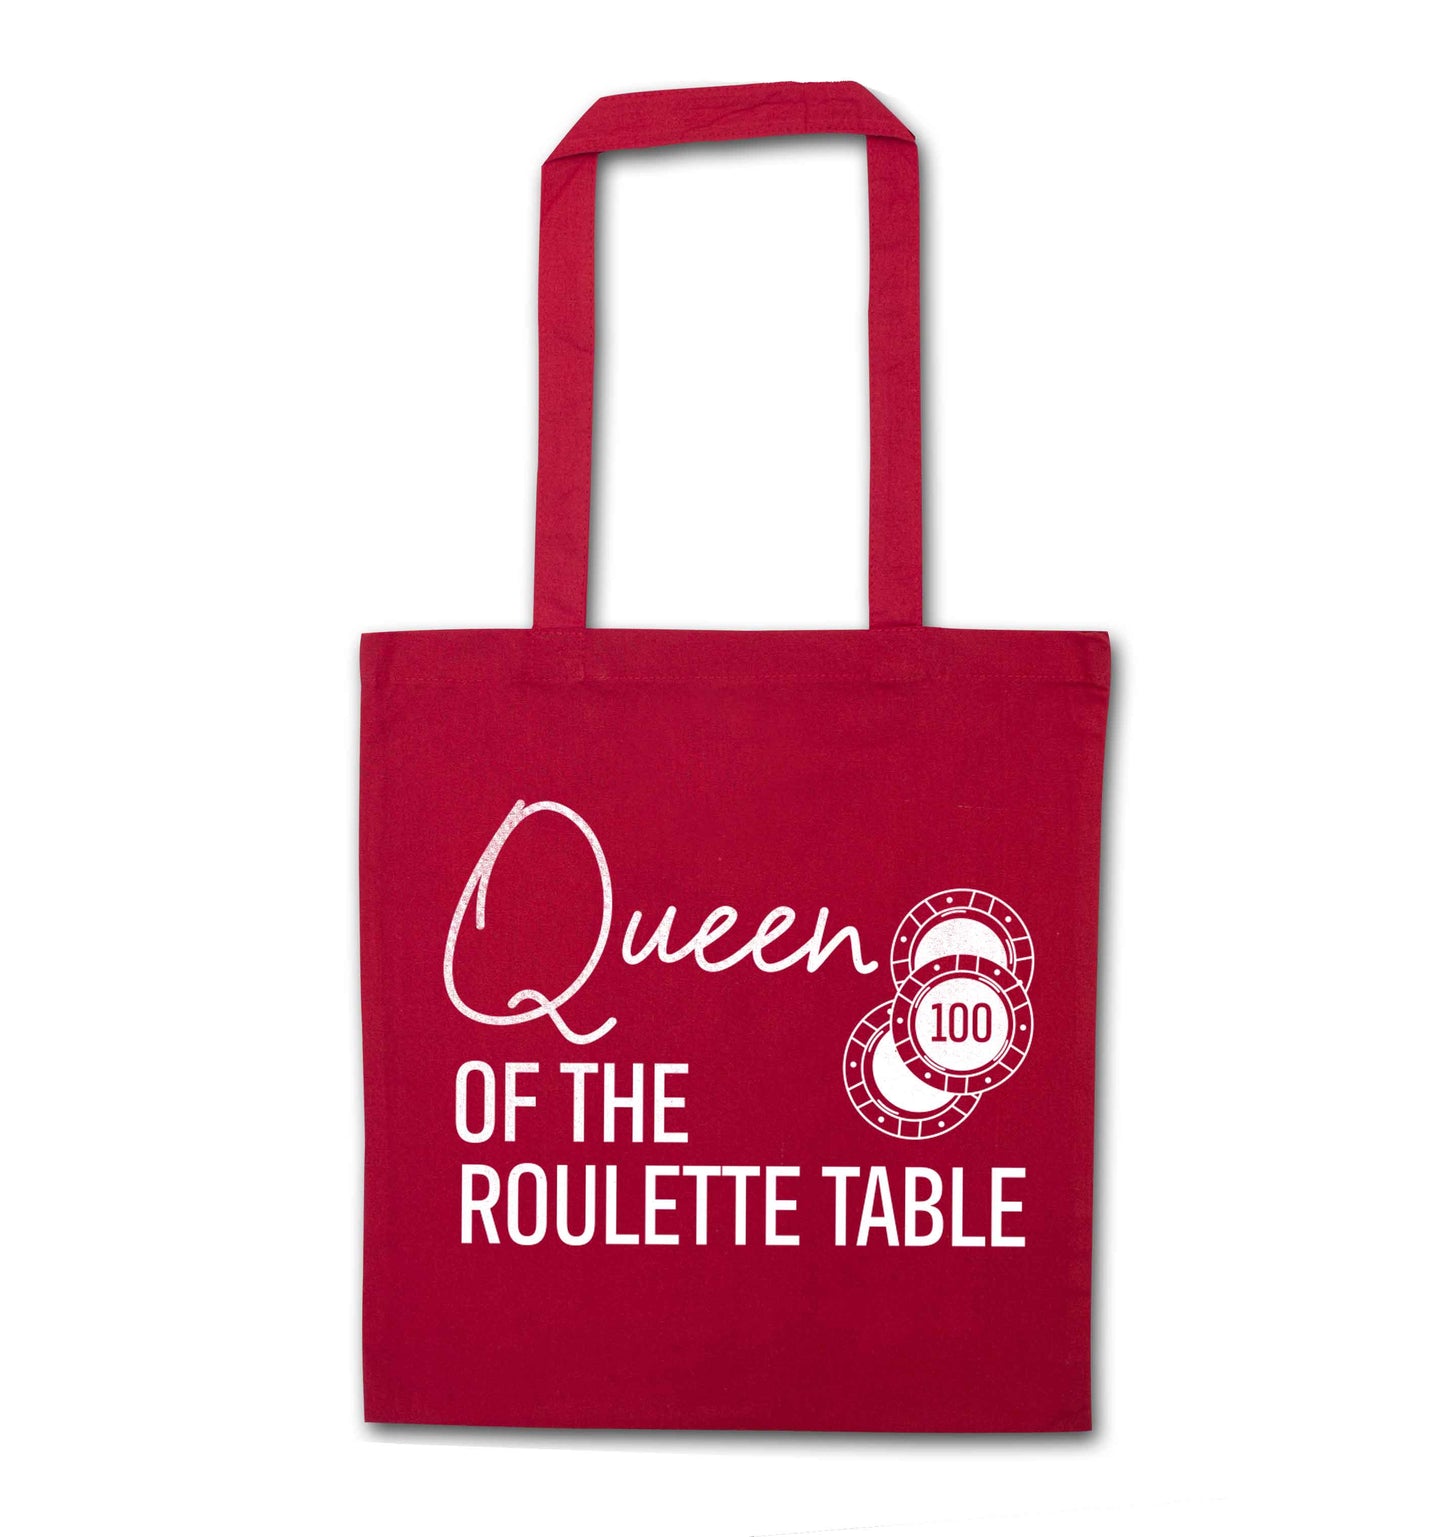 Queen of the roulette table red tote bag